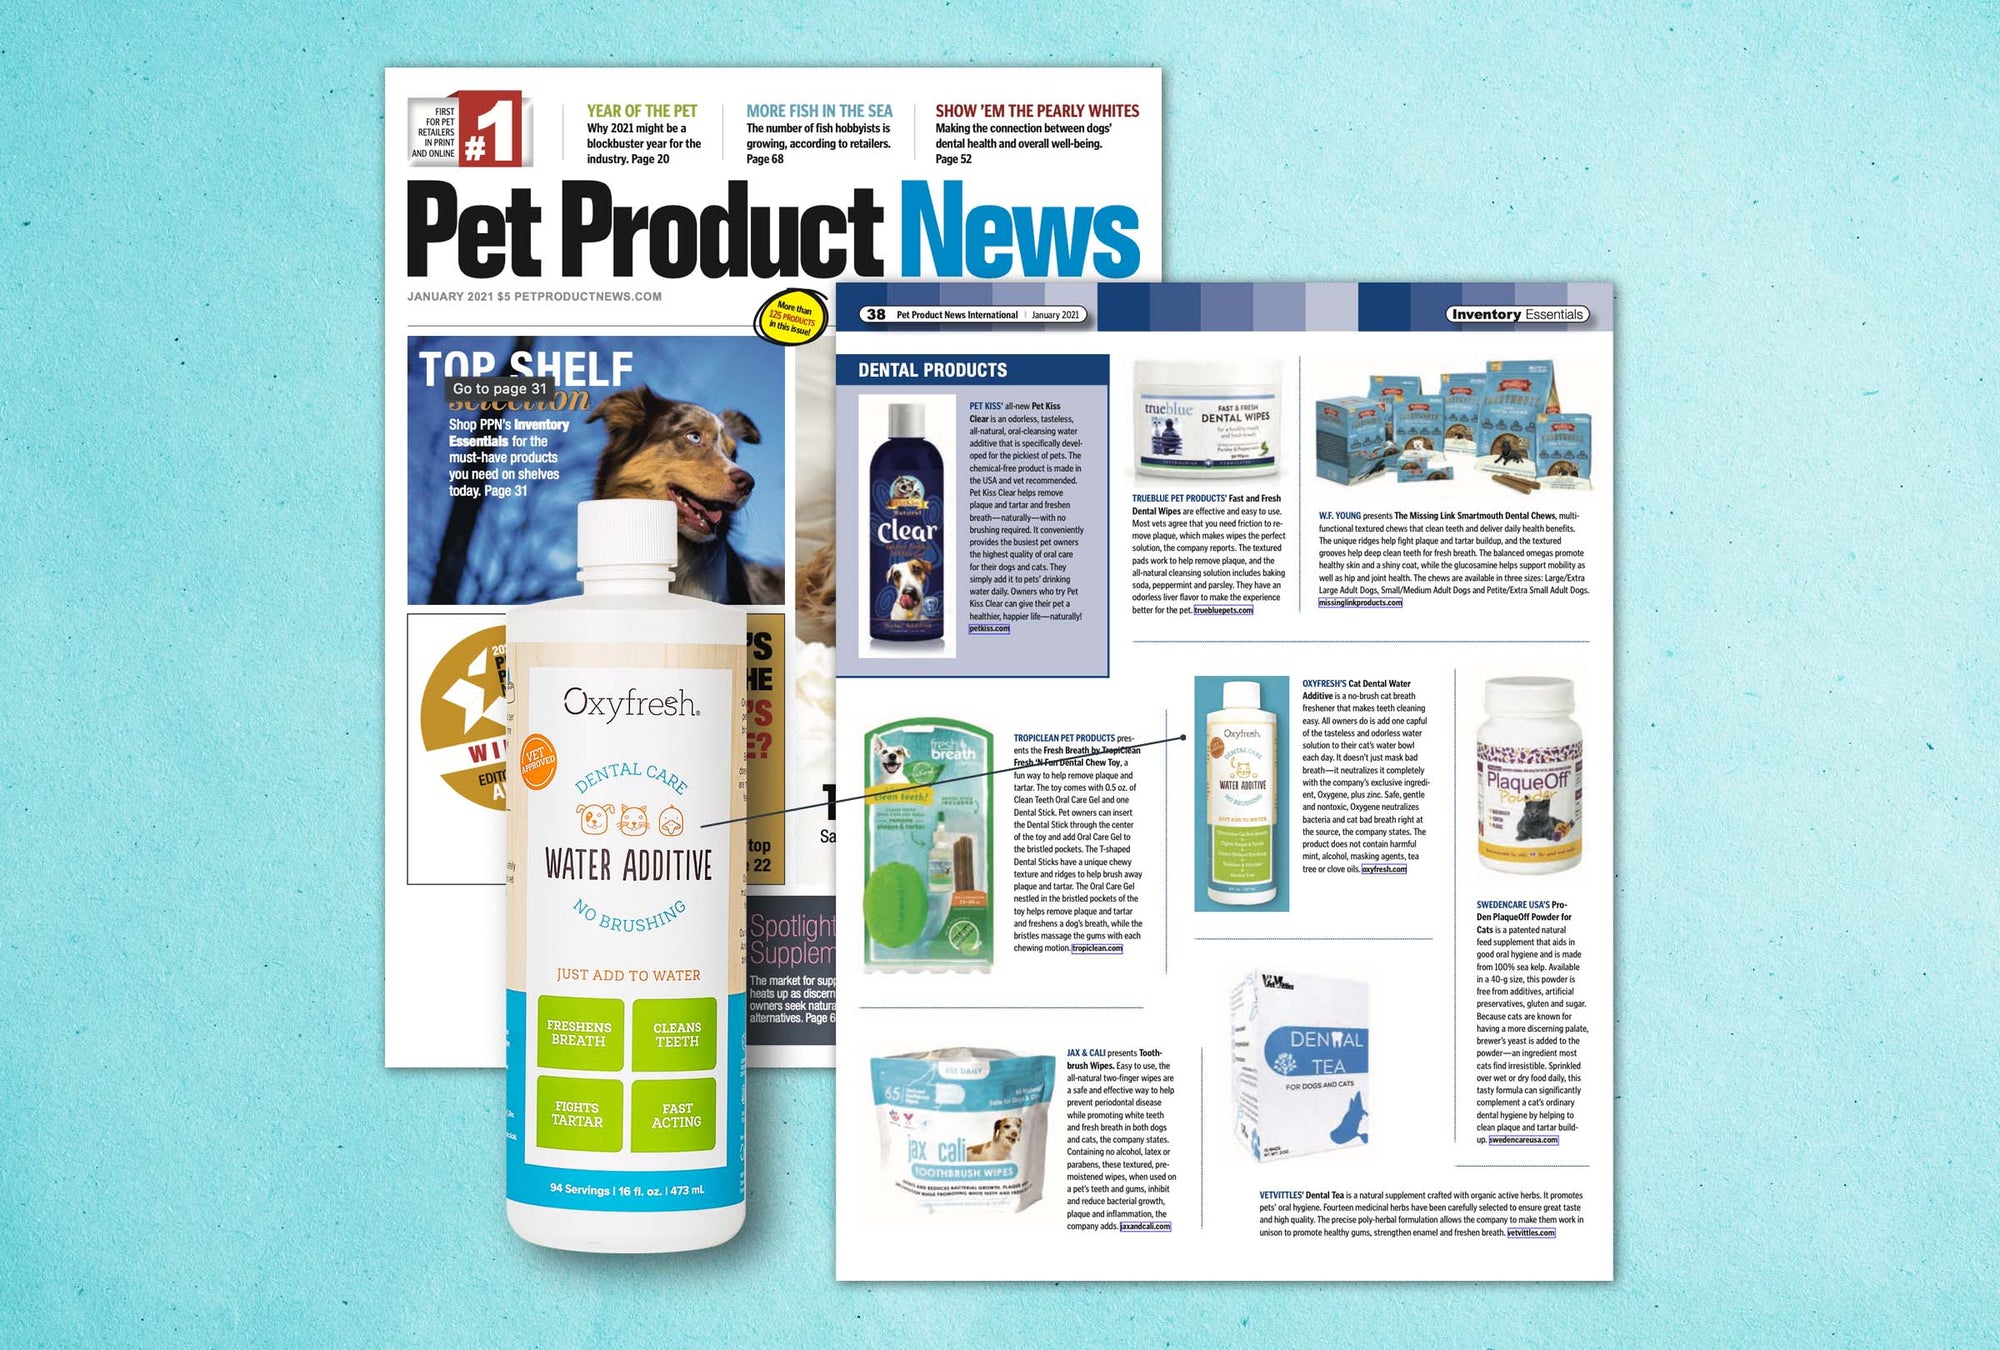 Oxyfresh Cat Dental Water Additive Featured in January 2021 Issue of Pet Product News